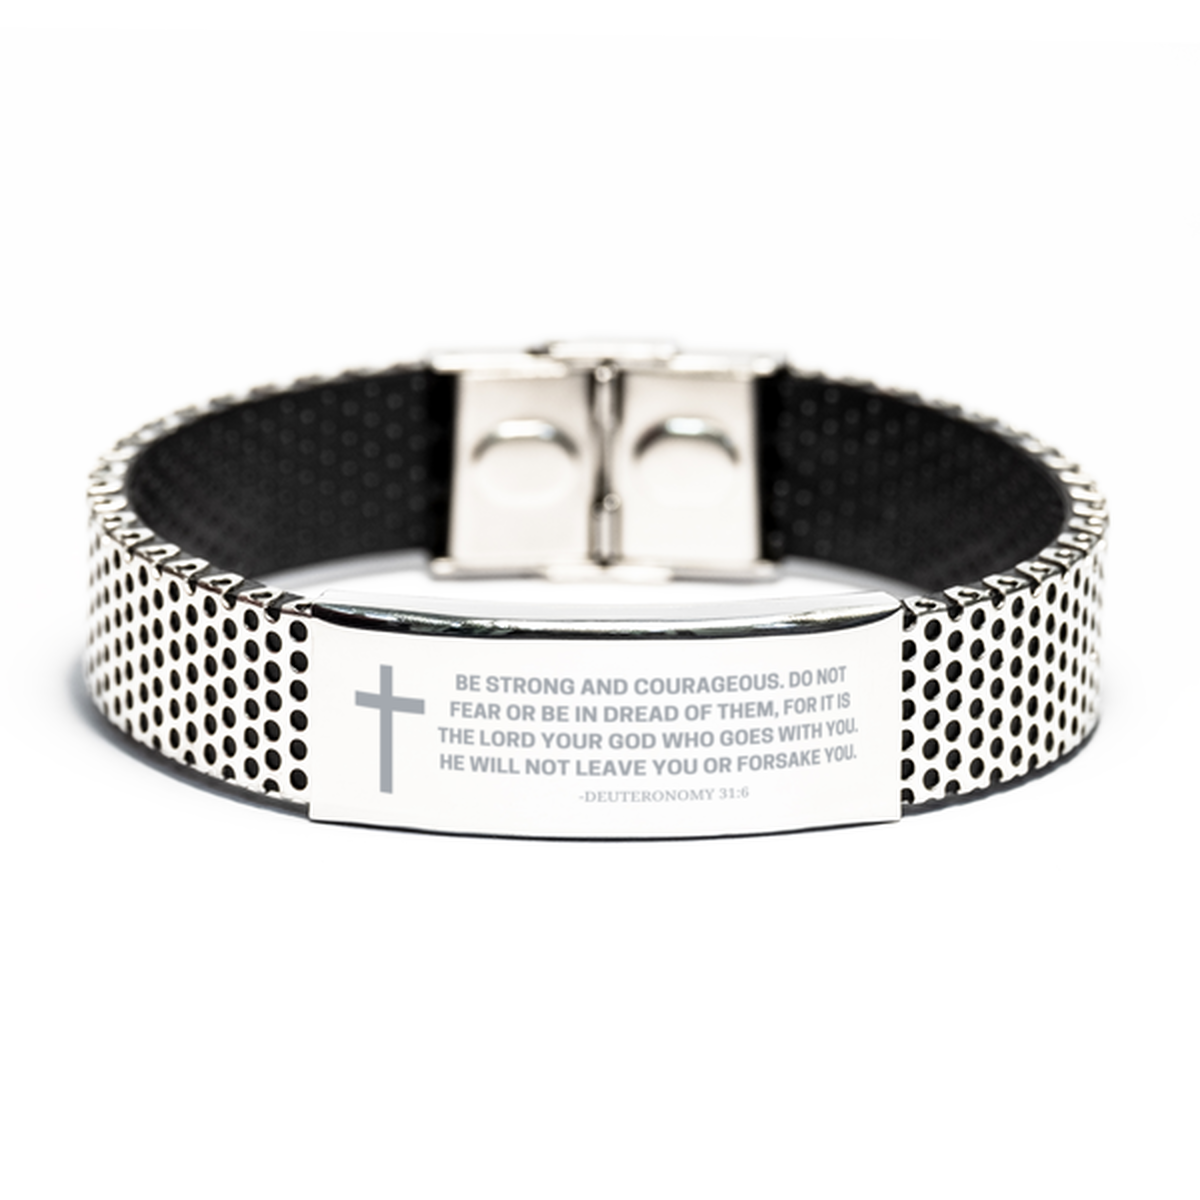 Baptism Gifts For Teenage Boys Girls, Christian Bible Verse Stainless Steel Bracelet, Be strong and courageous, Catholic Confirmation Gifts for Son, Godson, Grandson, Nephew